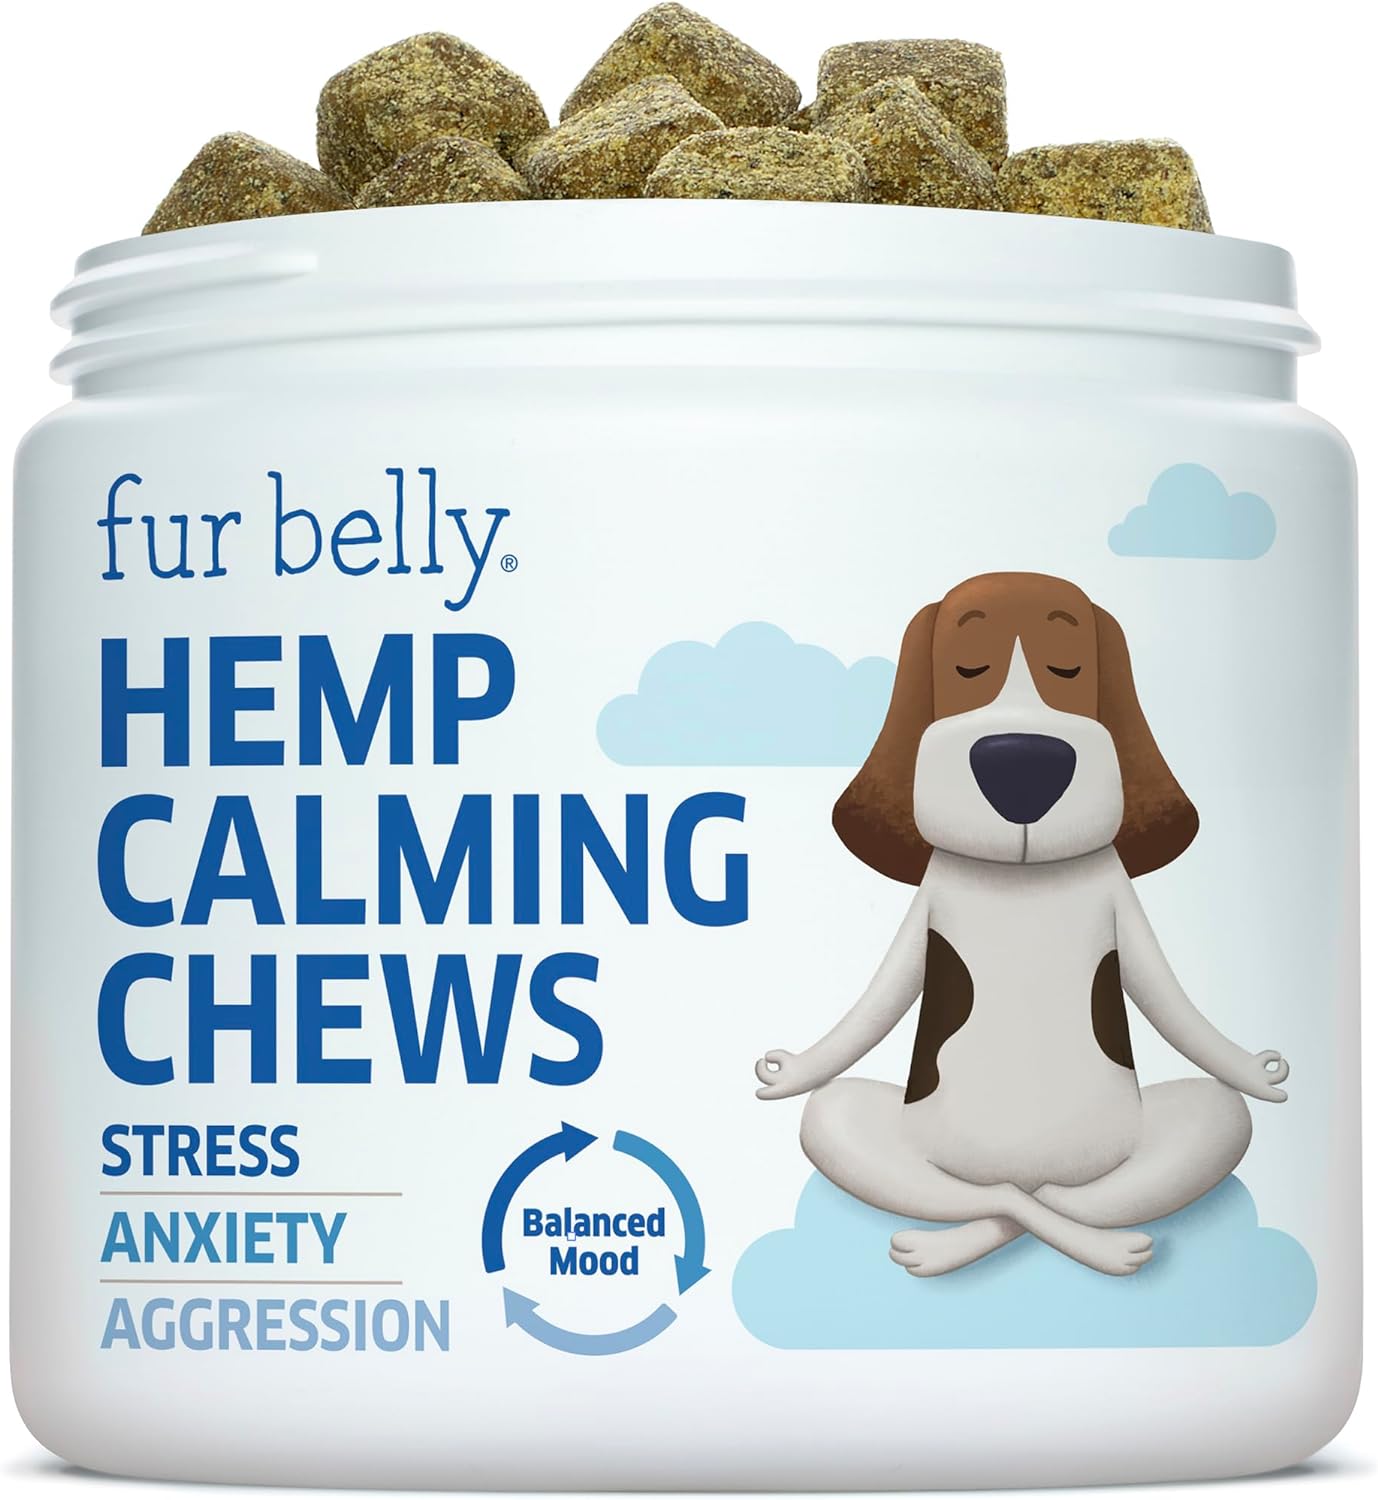 Calming Chews for Dogs - Dog Calming Chews - Natural Dog Anxiety Relief Treats - Separation, Stress, Barking, Thunderstorms, Lightning - Dog Anxiety Chews - 120 Calming Dog Treats